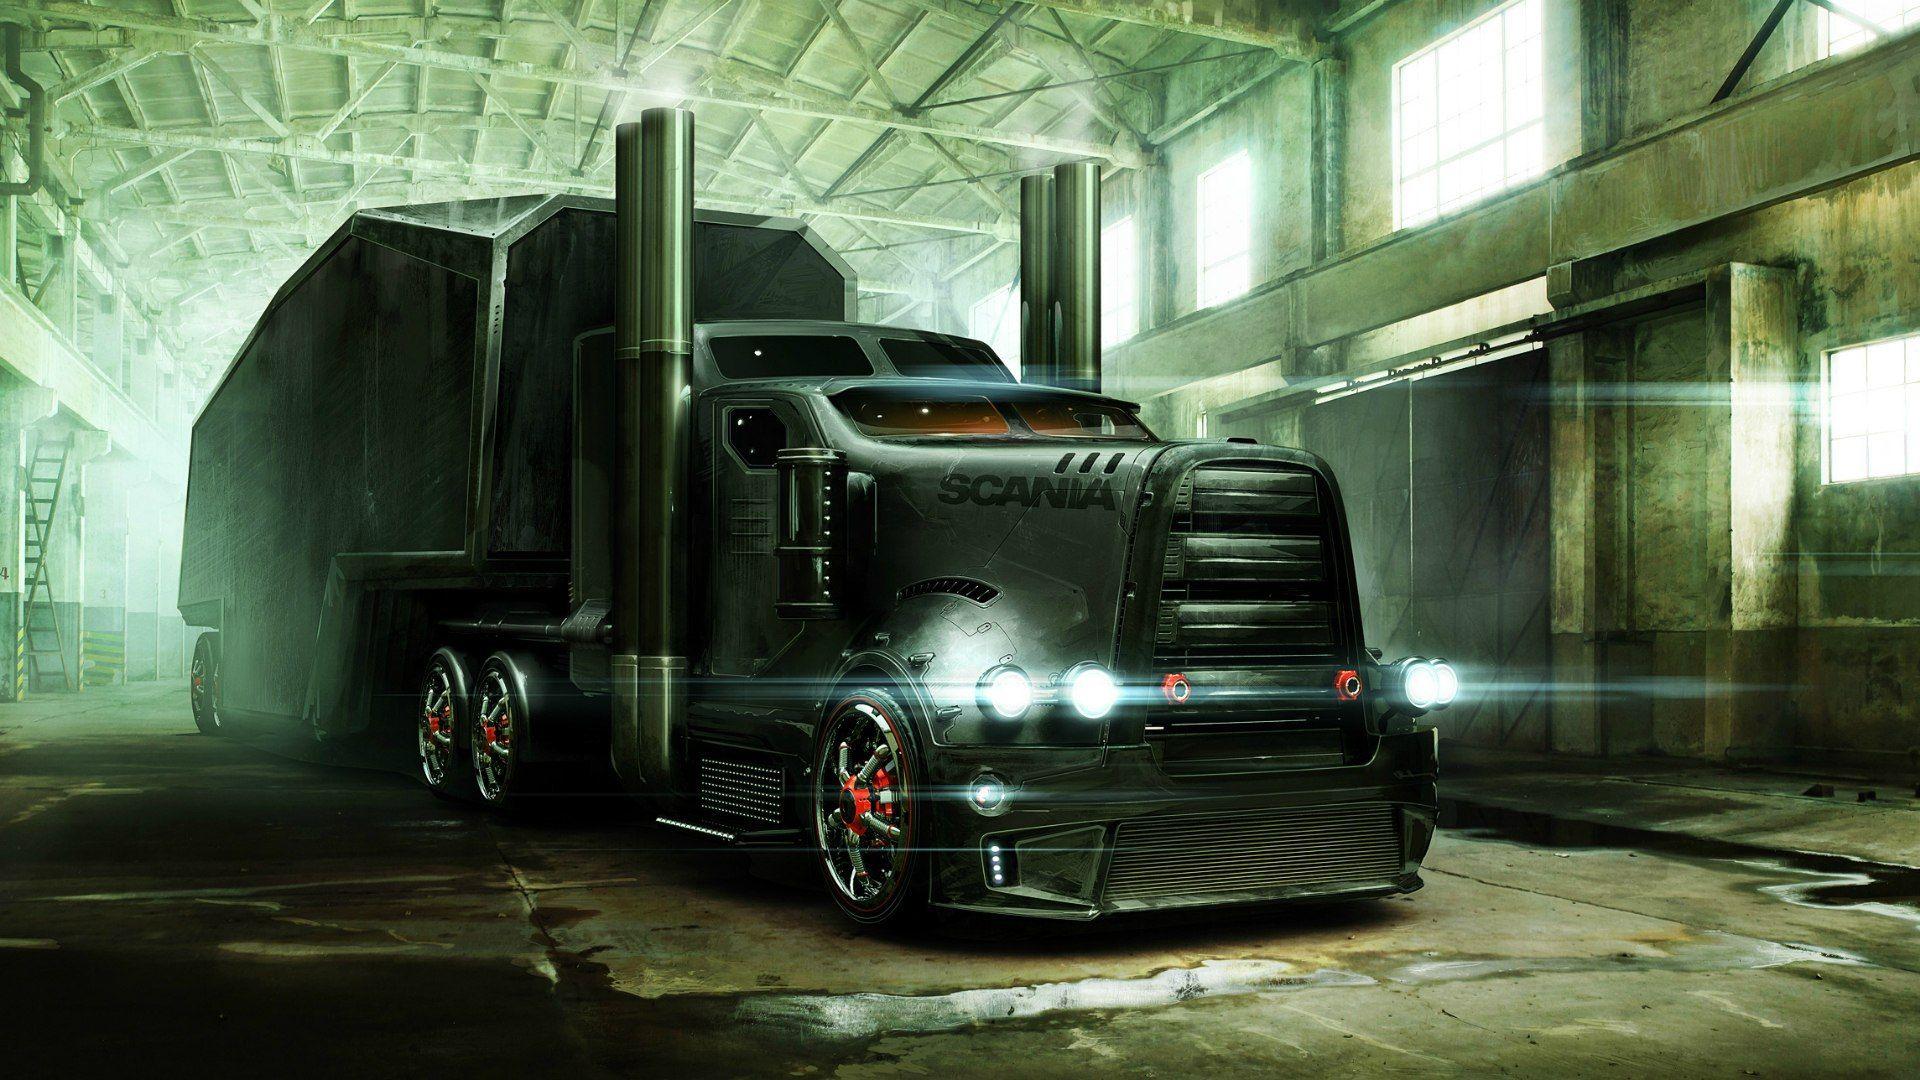 Was searching for a cool truck wallpaper and came across this